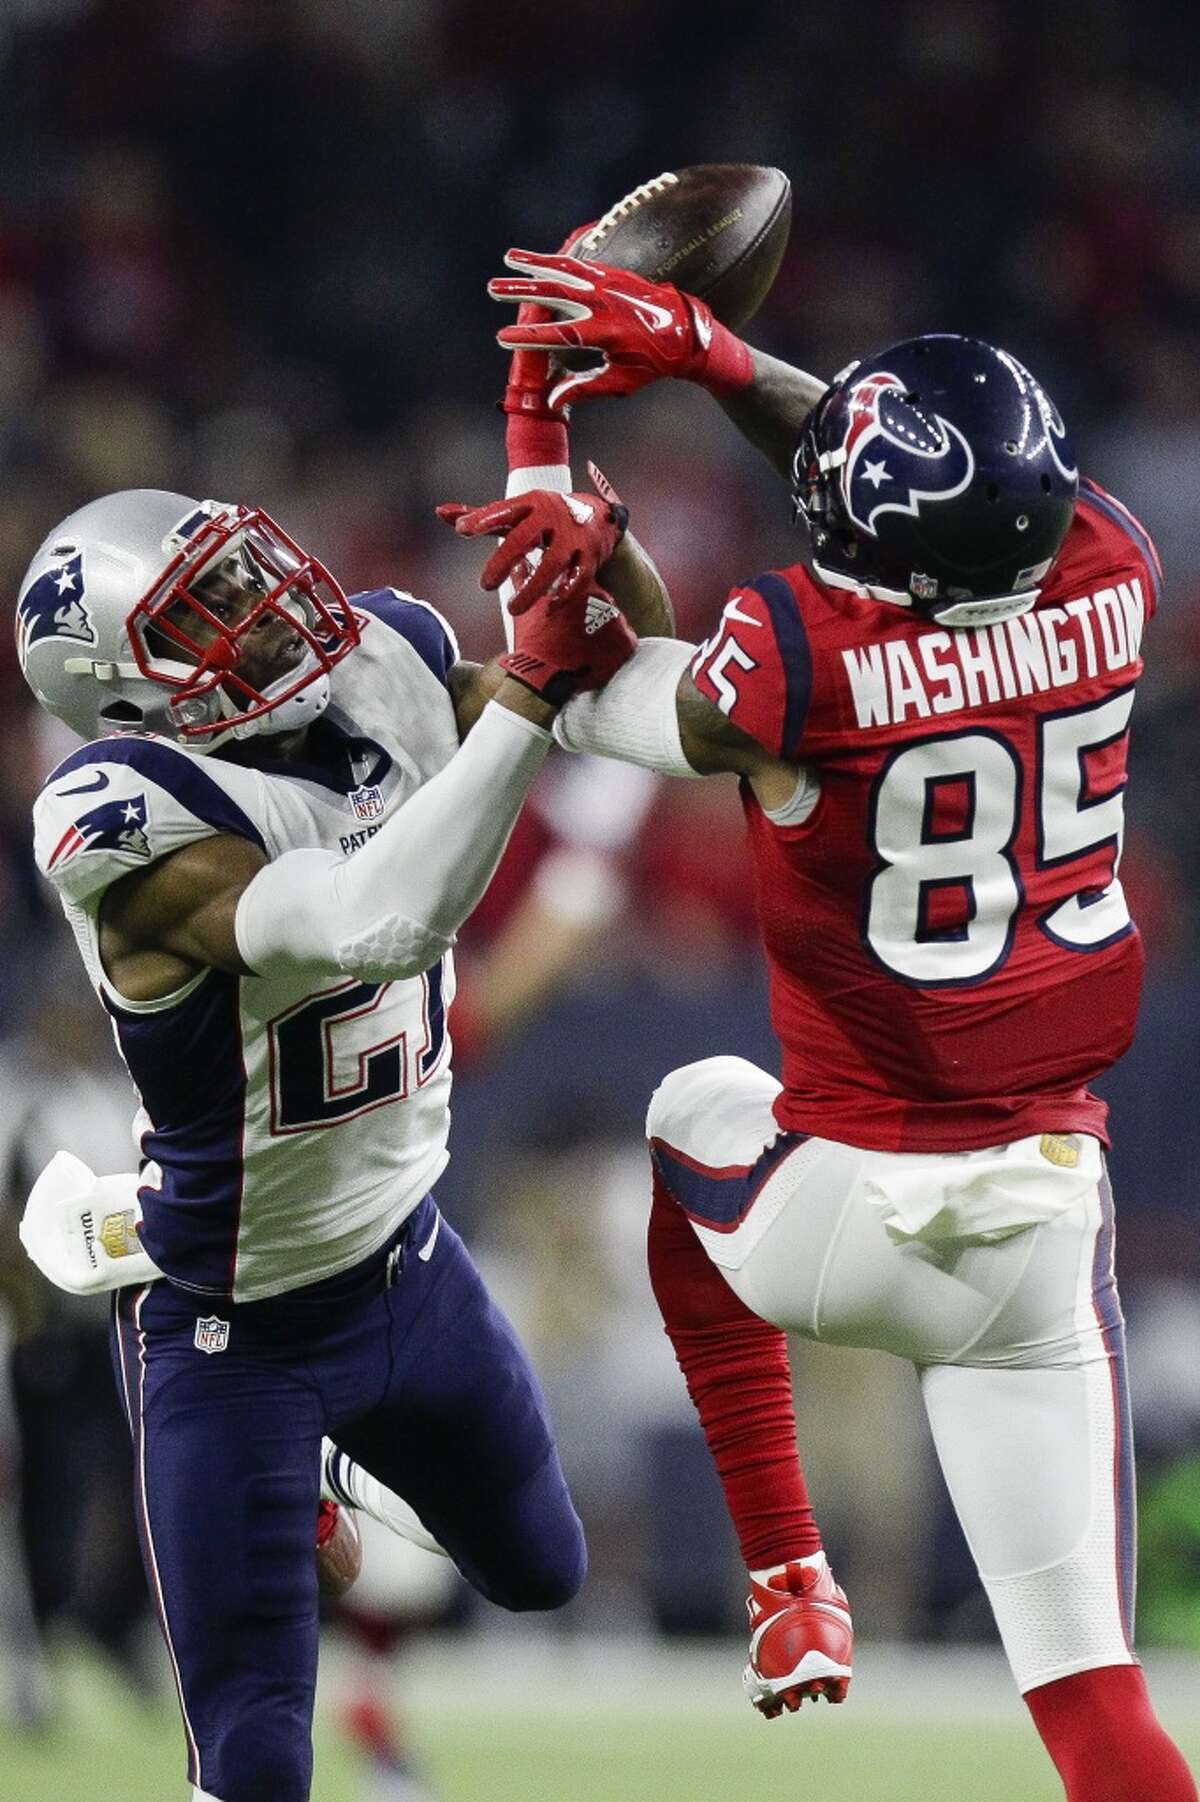 Houston Texans wide receiver Nate Washington (85) misses a pass while being defended by New England Patriots cornerback Malcolm Butler (21) during the second half an NFL game at NRG Stadium Sunday, Dec. 13, 2015, in Houston. ( Michael Ciaglo / Houston Chronicle )